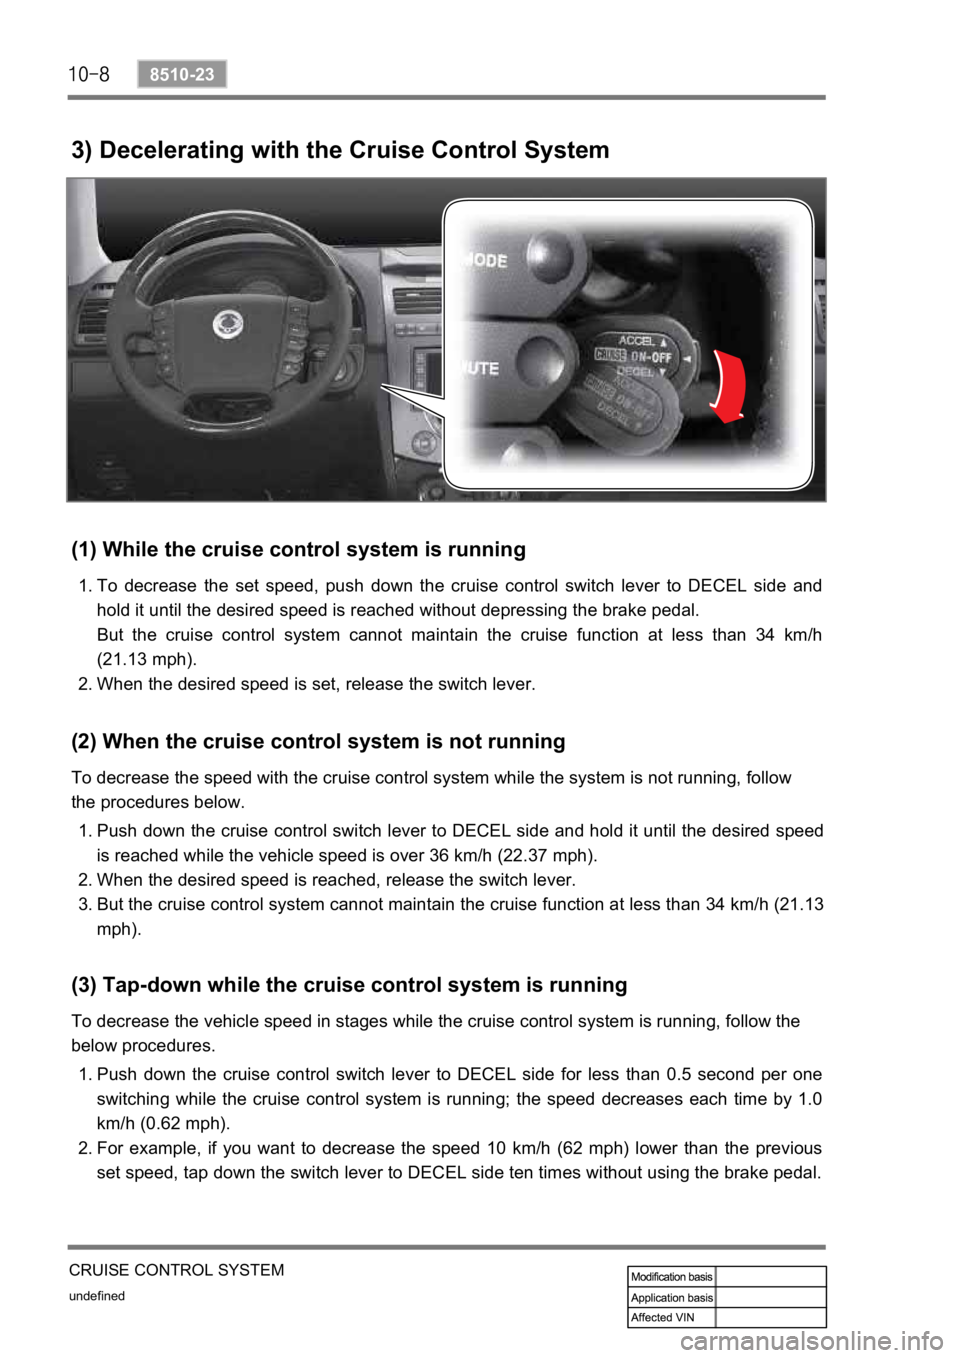 SSANGYONG REXTON 2008  Service Manual undefined
8510-23
CRUISE CONTROL SYSTEM
3) Decelerating with the Cruise Control System
(1) While the cruise control system is running
To  decrease  the  set  speed,  push  down  the  cruise  control  